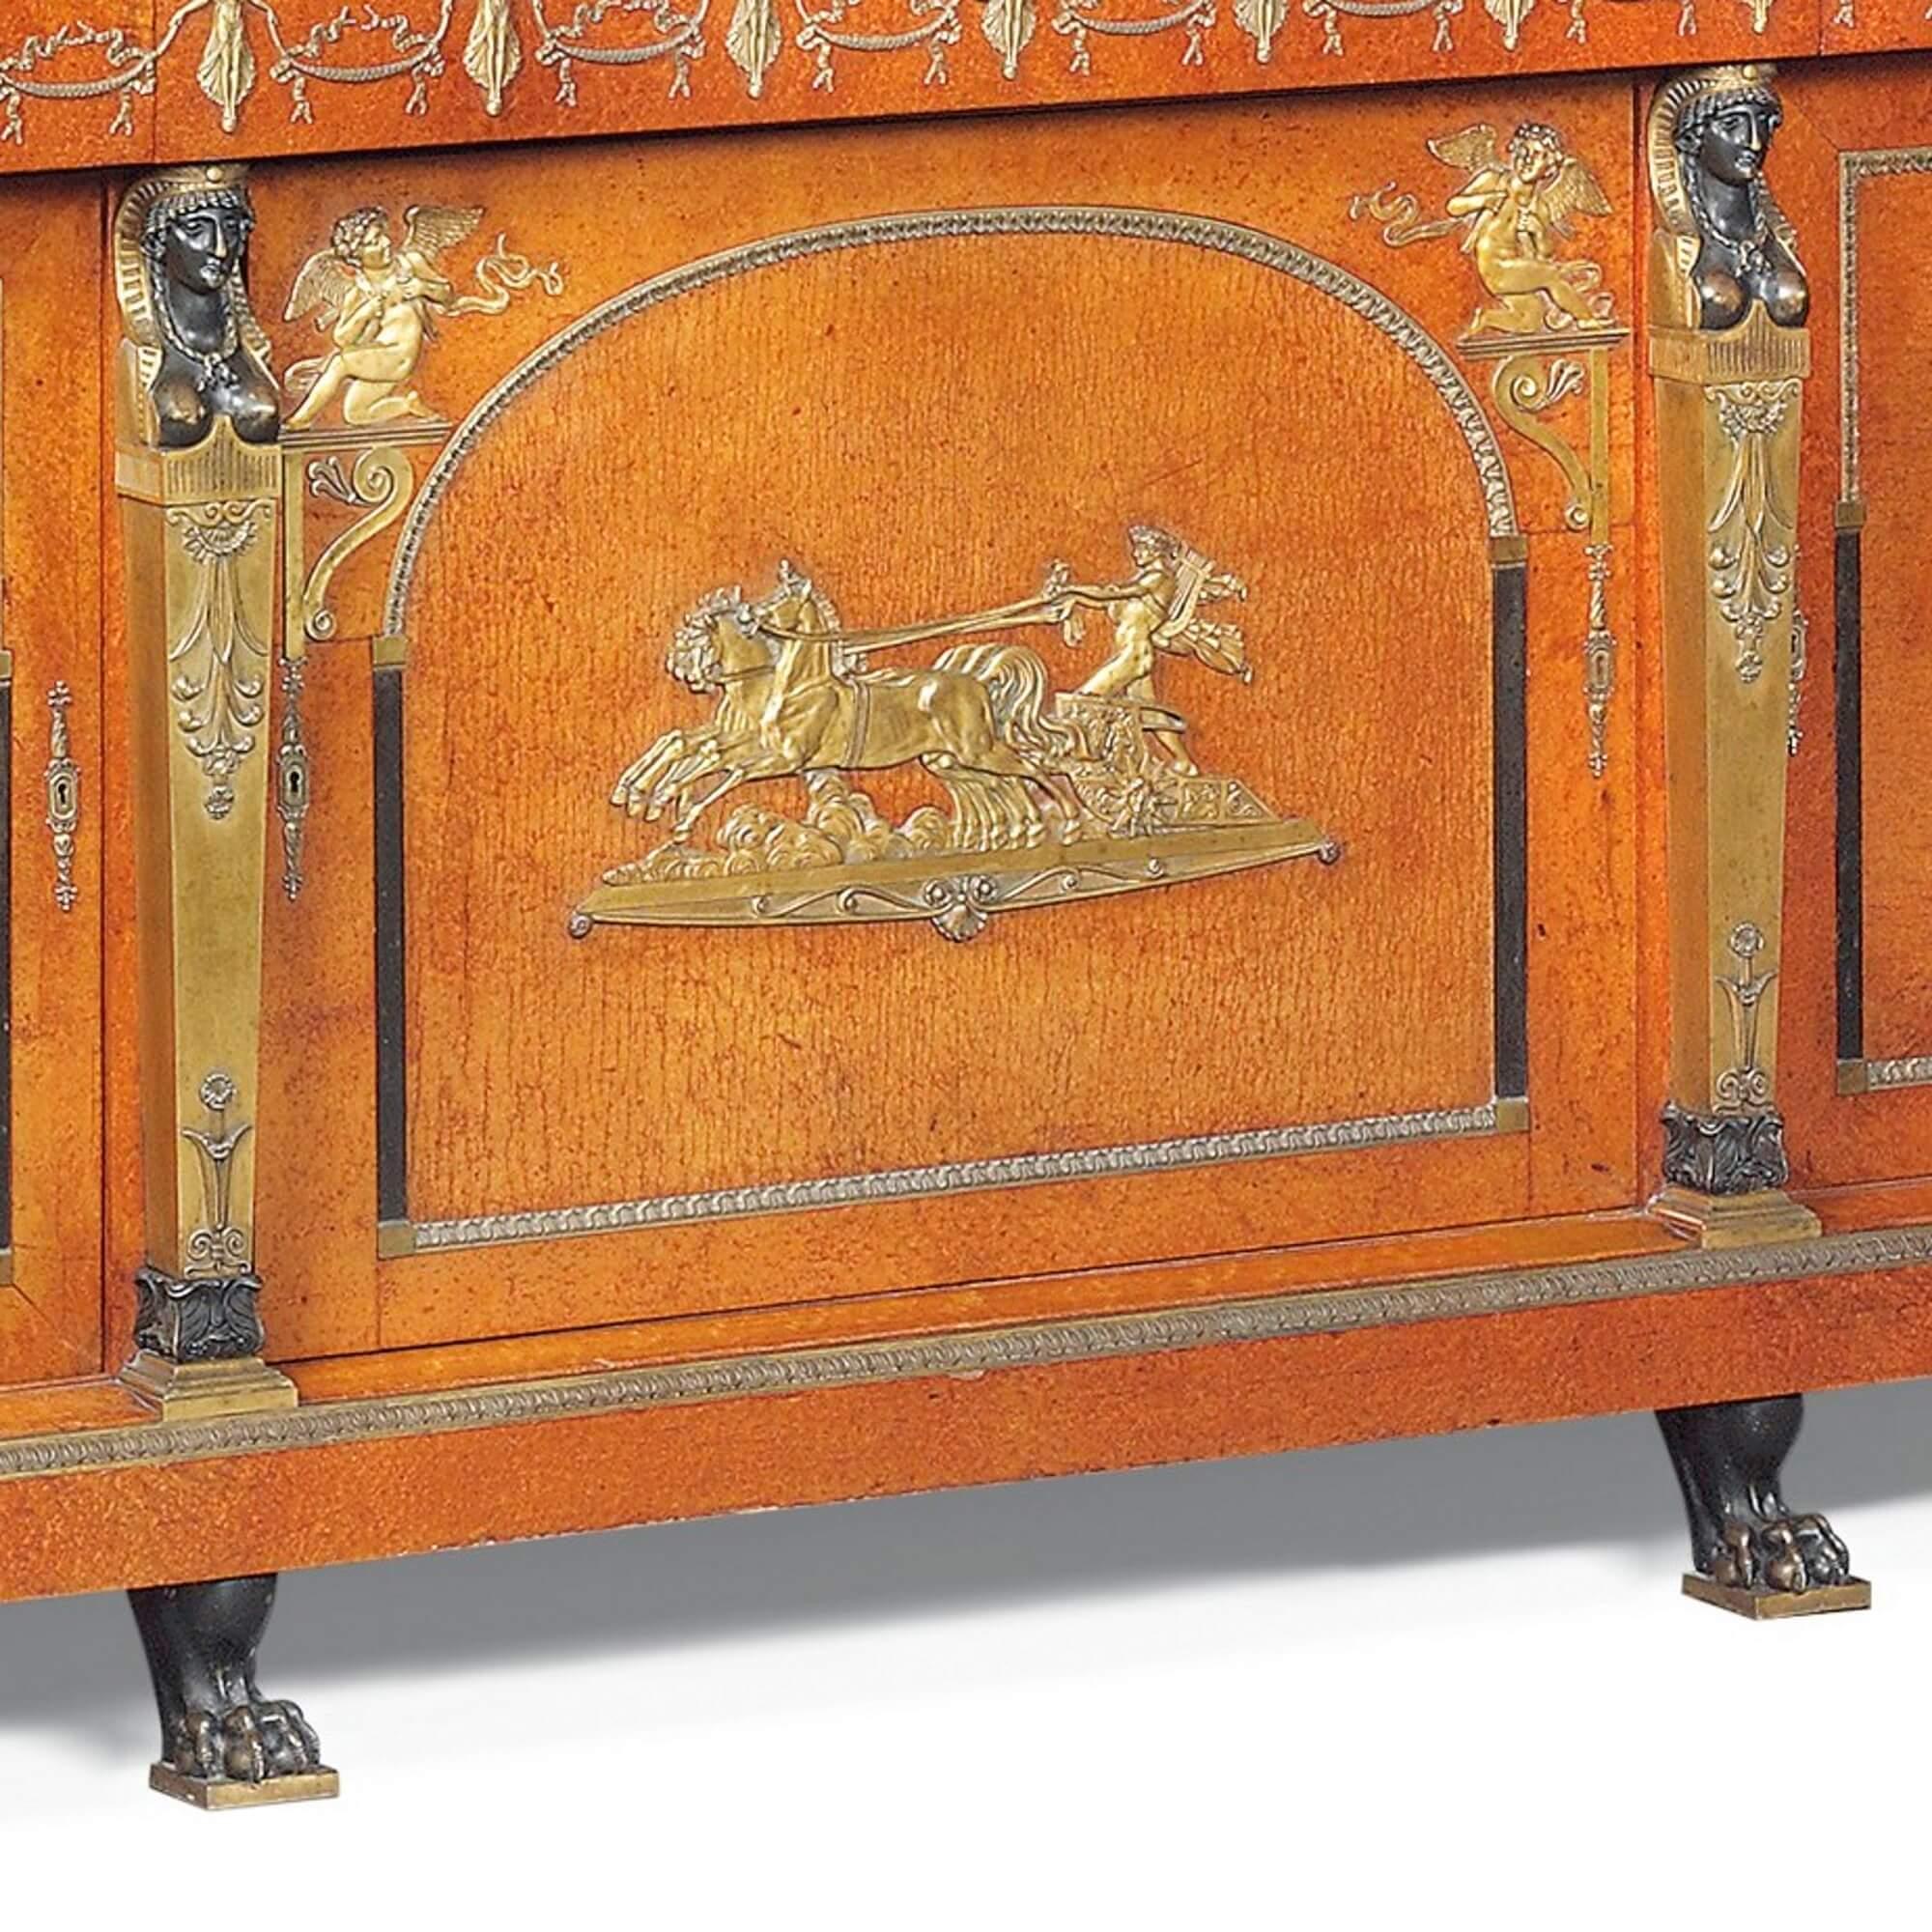 Impressive Empire style buffet by Maison Krieger
French, circa 1900
Measures: Height 199cm, width 217cm, depth 66cm

This magnificent Empire style cabinet is a superb work of French craftsmanship by the esteemed Maison Krieger. The lower section